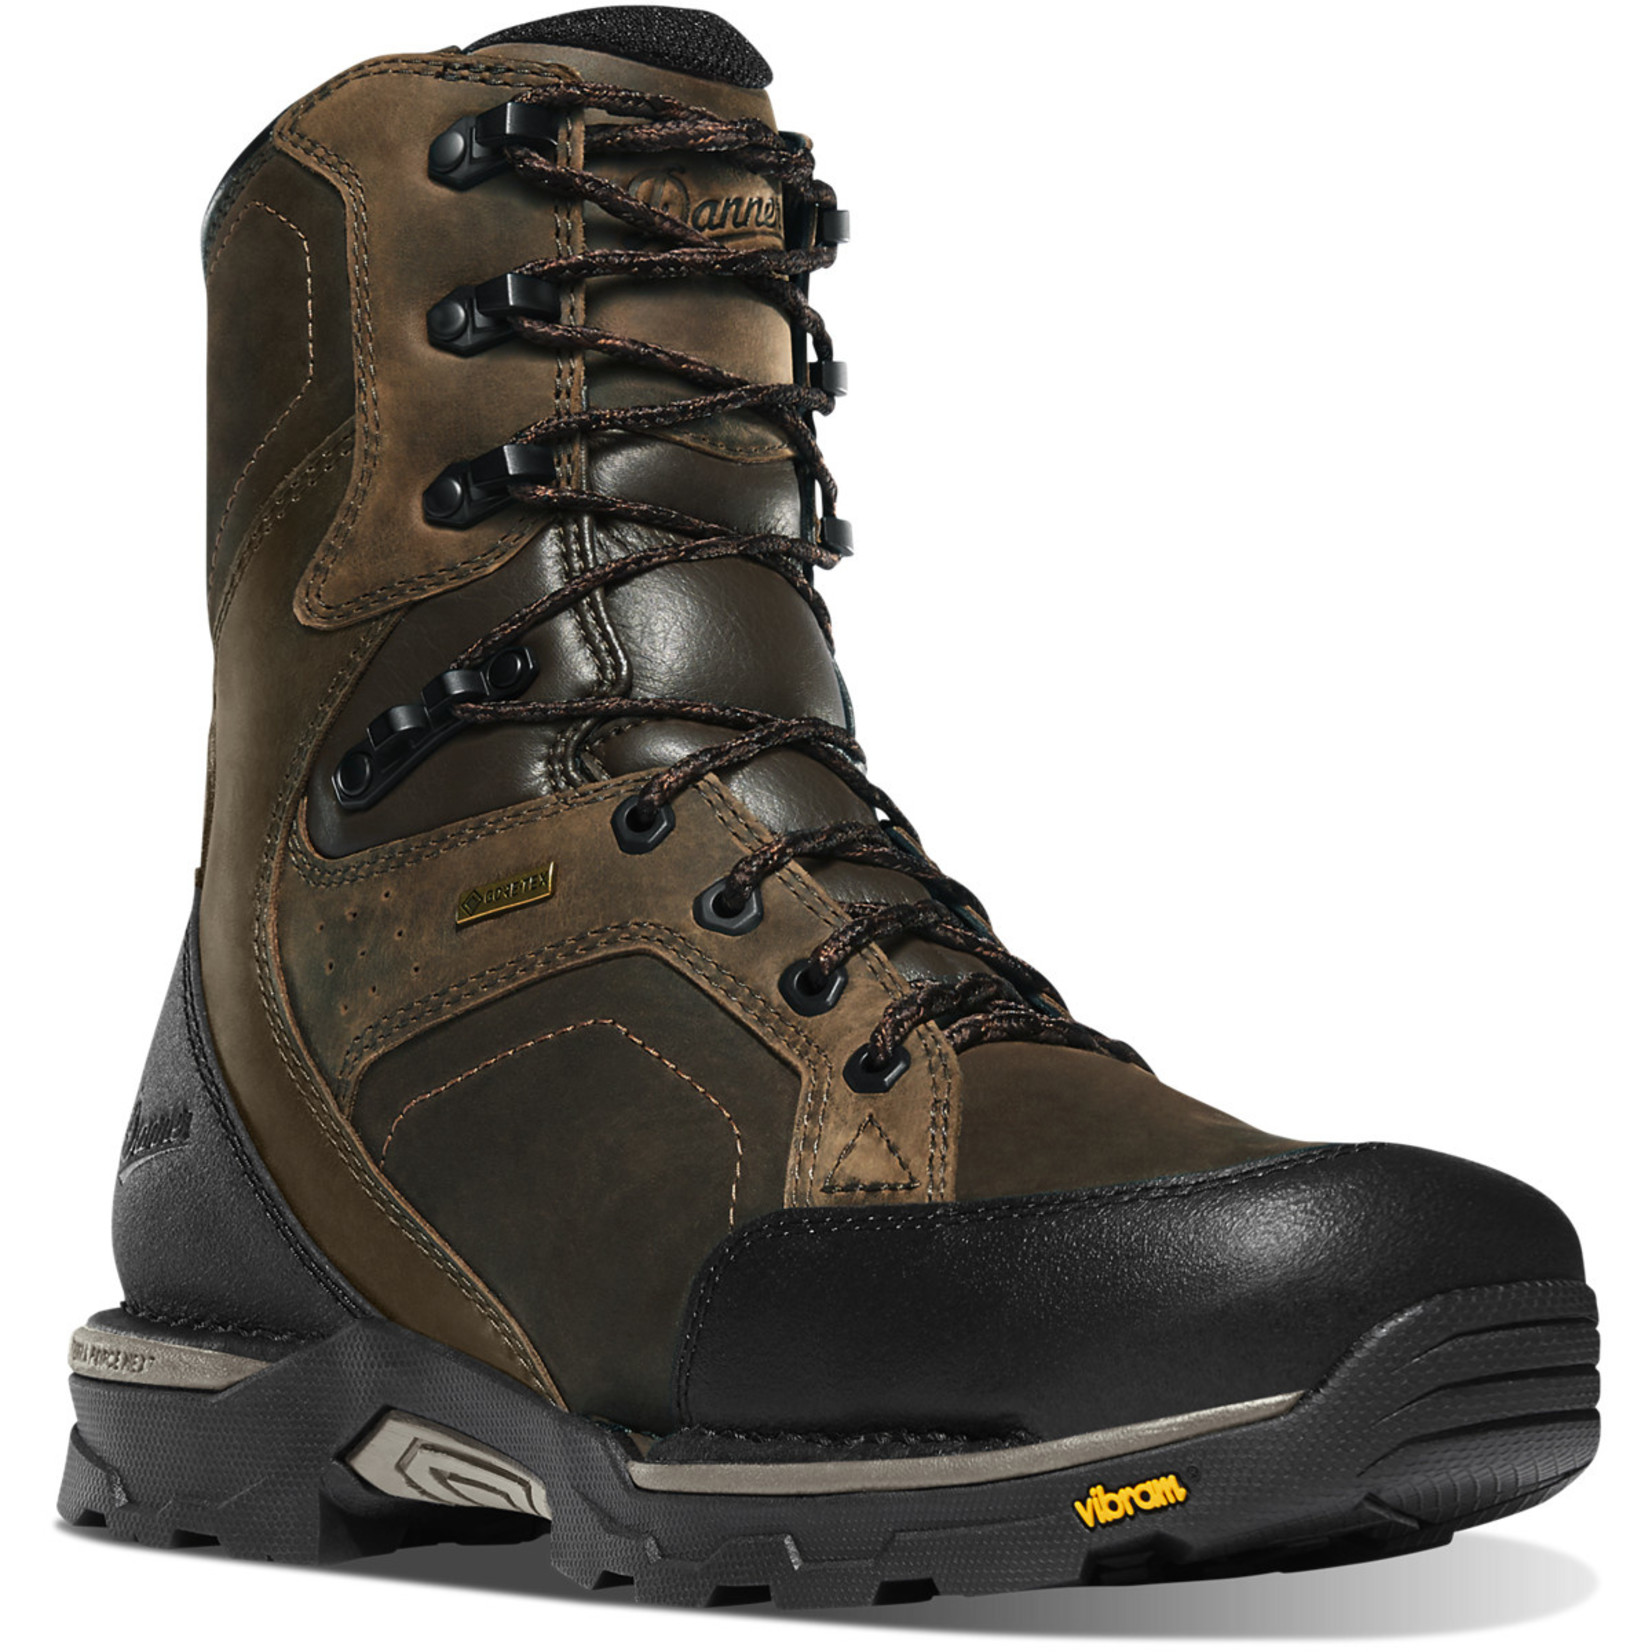 Danner Danner 15863 Crucial 8” Class 75/75 EH WP Men’s NMT Safety Toe Boots